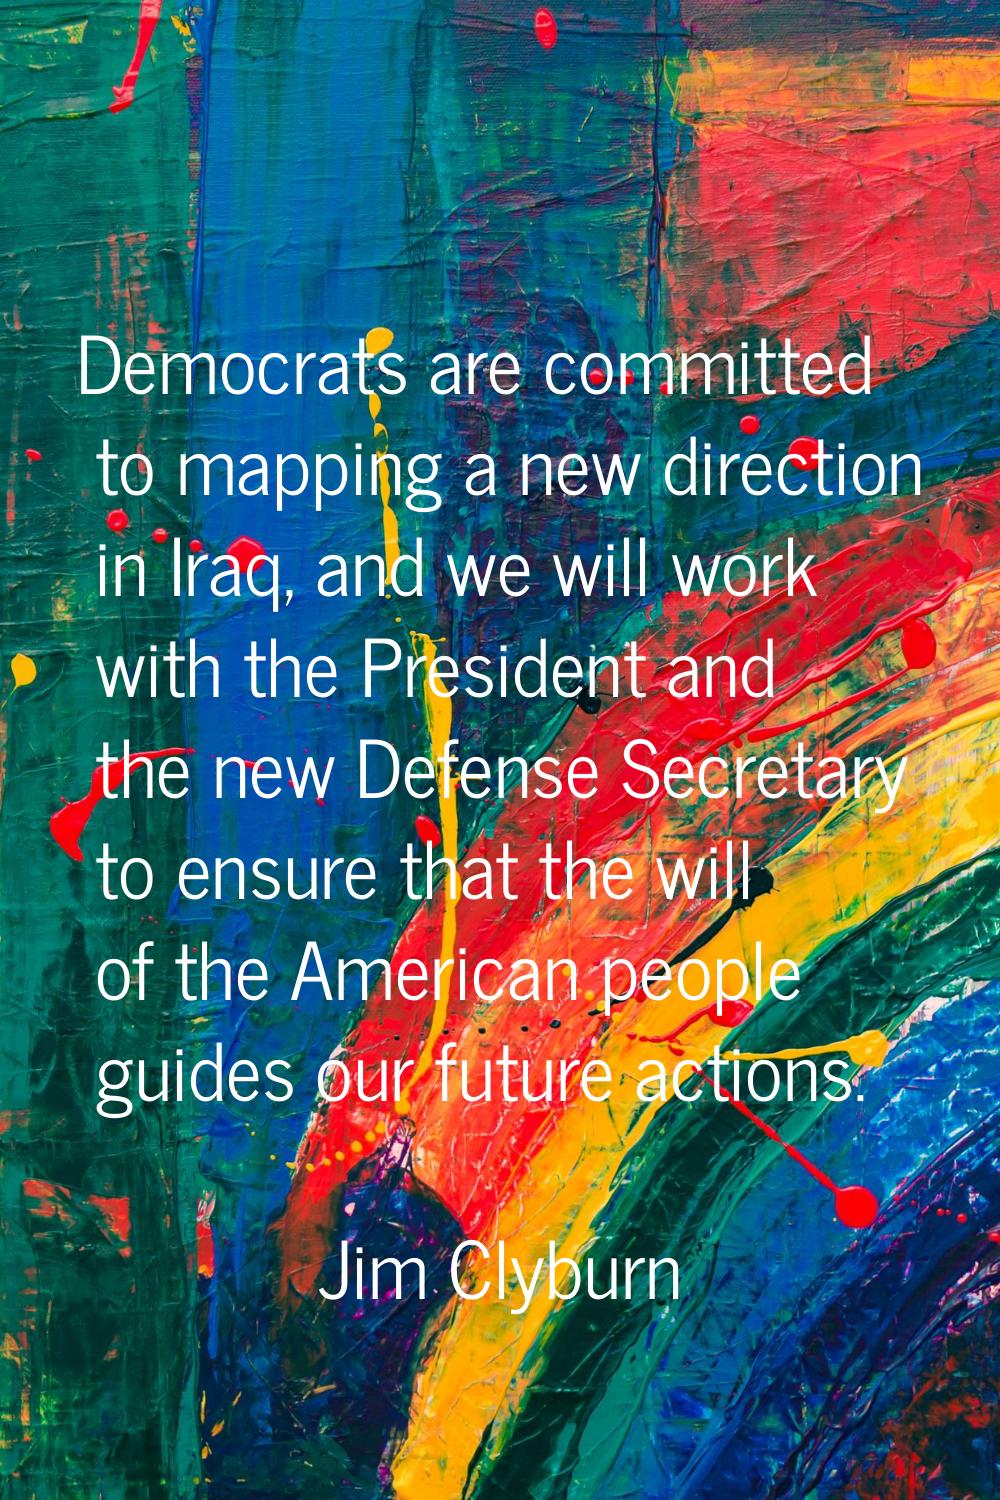 Democrats are committed to mapping a new direction in Iraq, and we will work with the President and